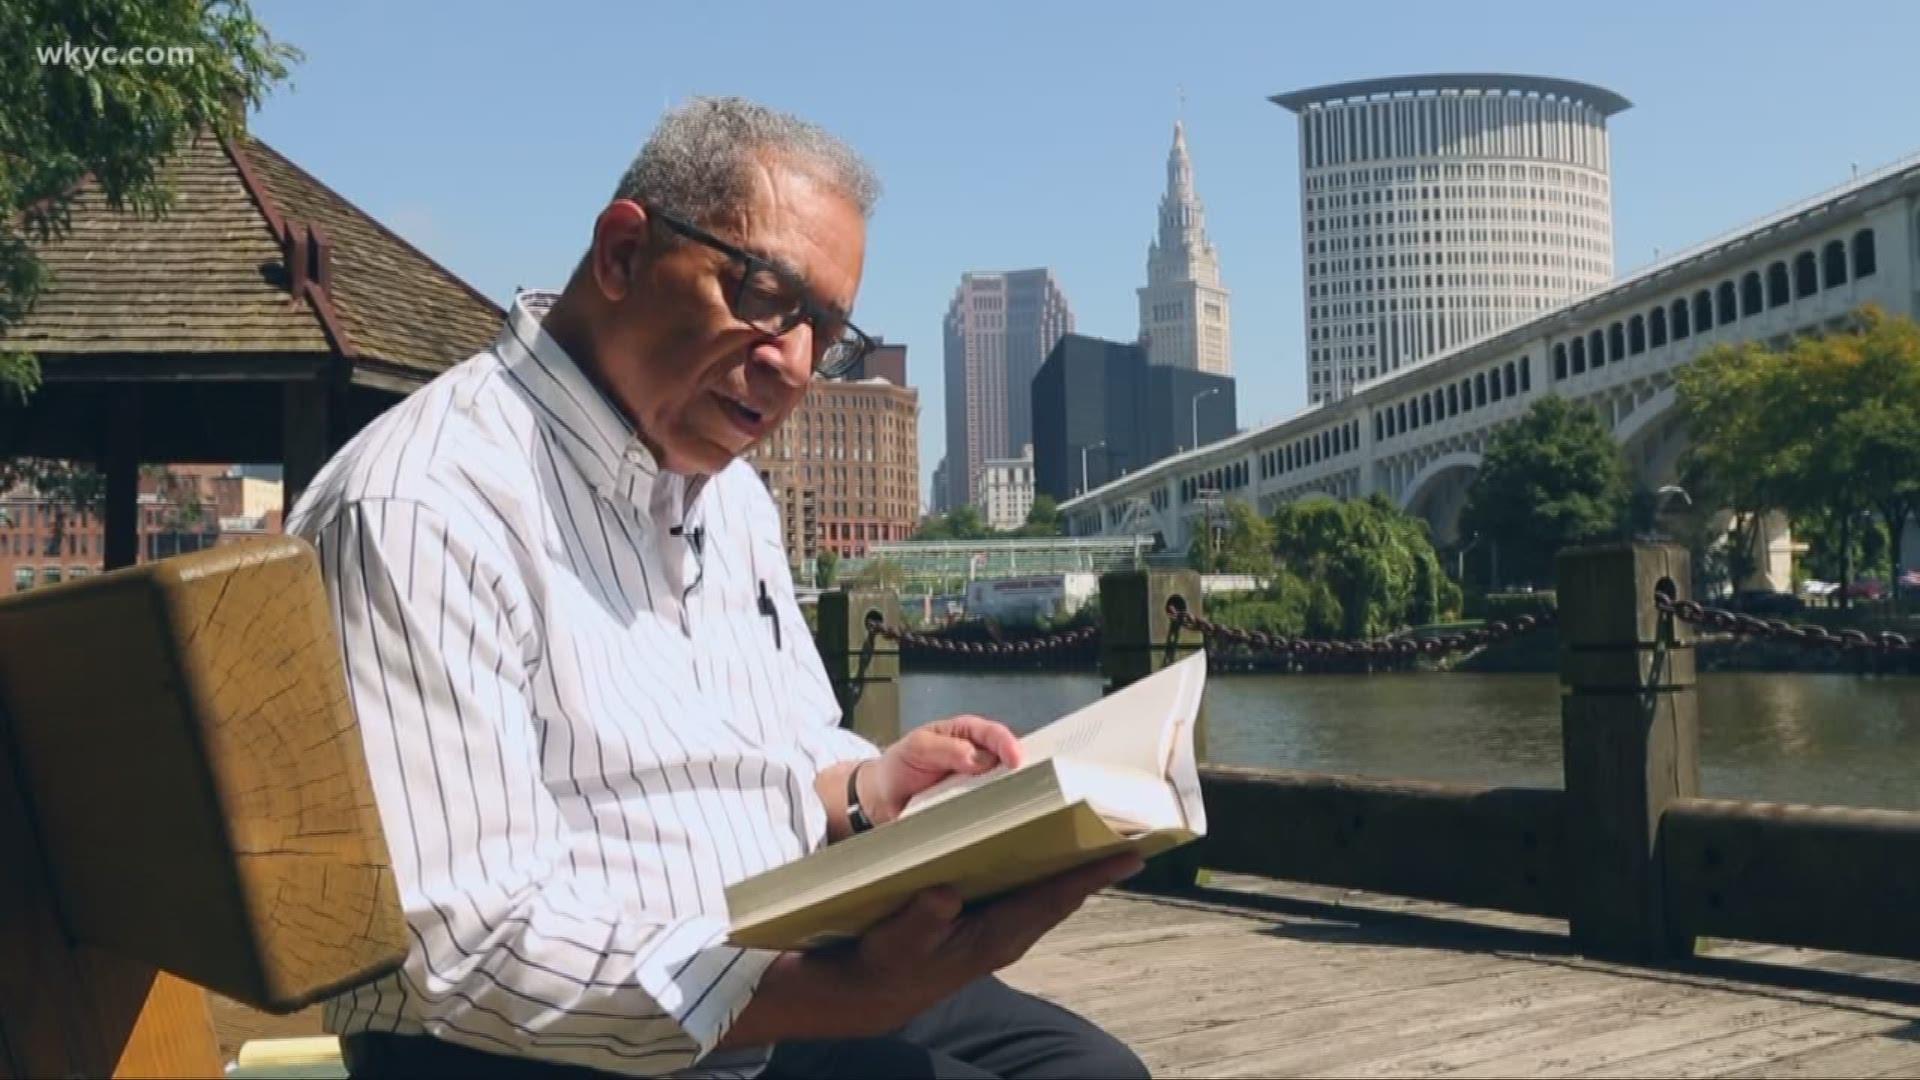 Sept. 23, 2018: Here at WKYC, we try to do our part to encourage early literacy for those who many not have that chance in Cleveland's inner city. Leon Bibb shows us the work that's being done in the Hough neighborhood.